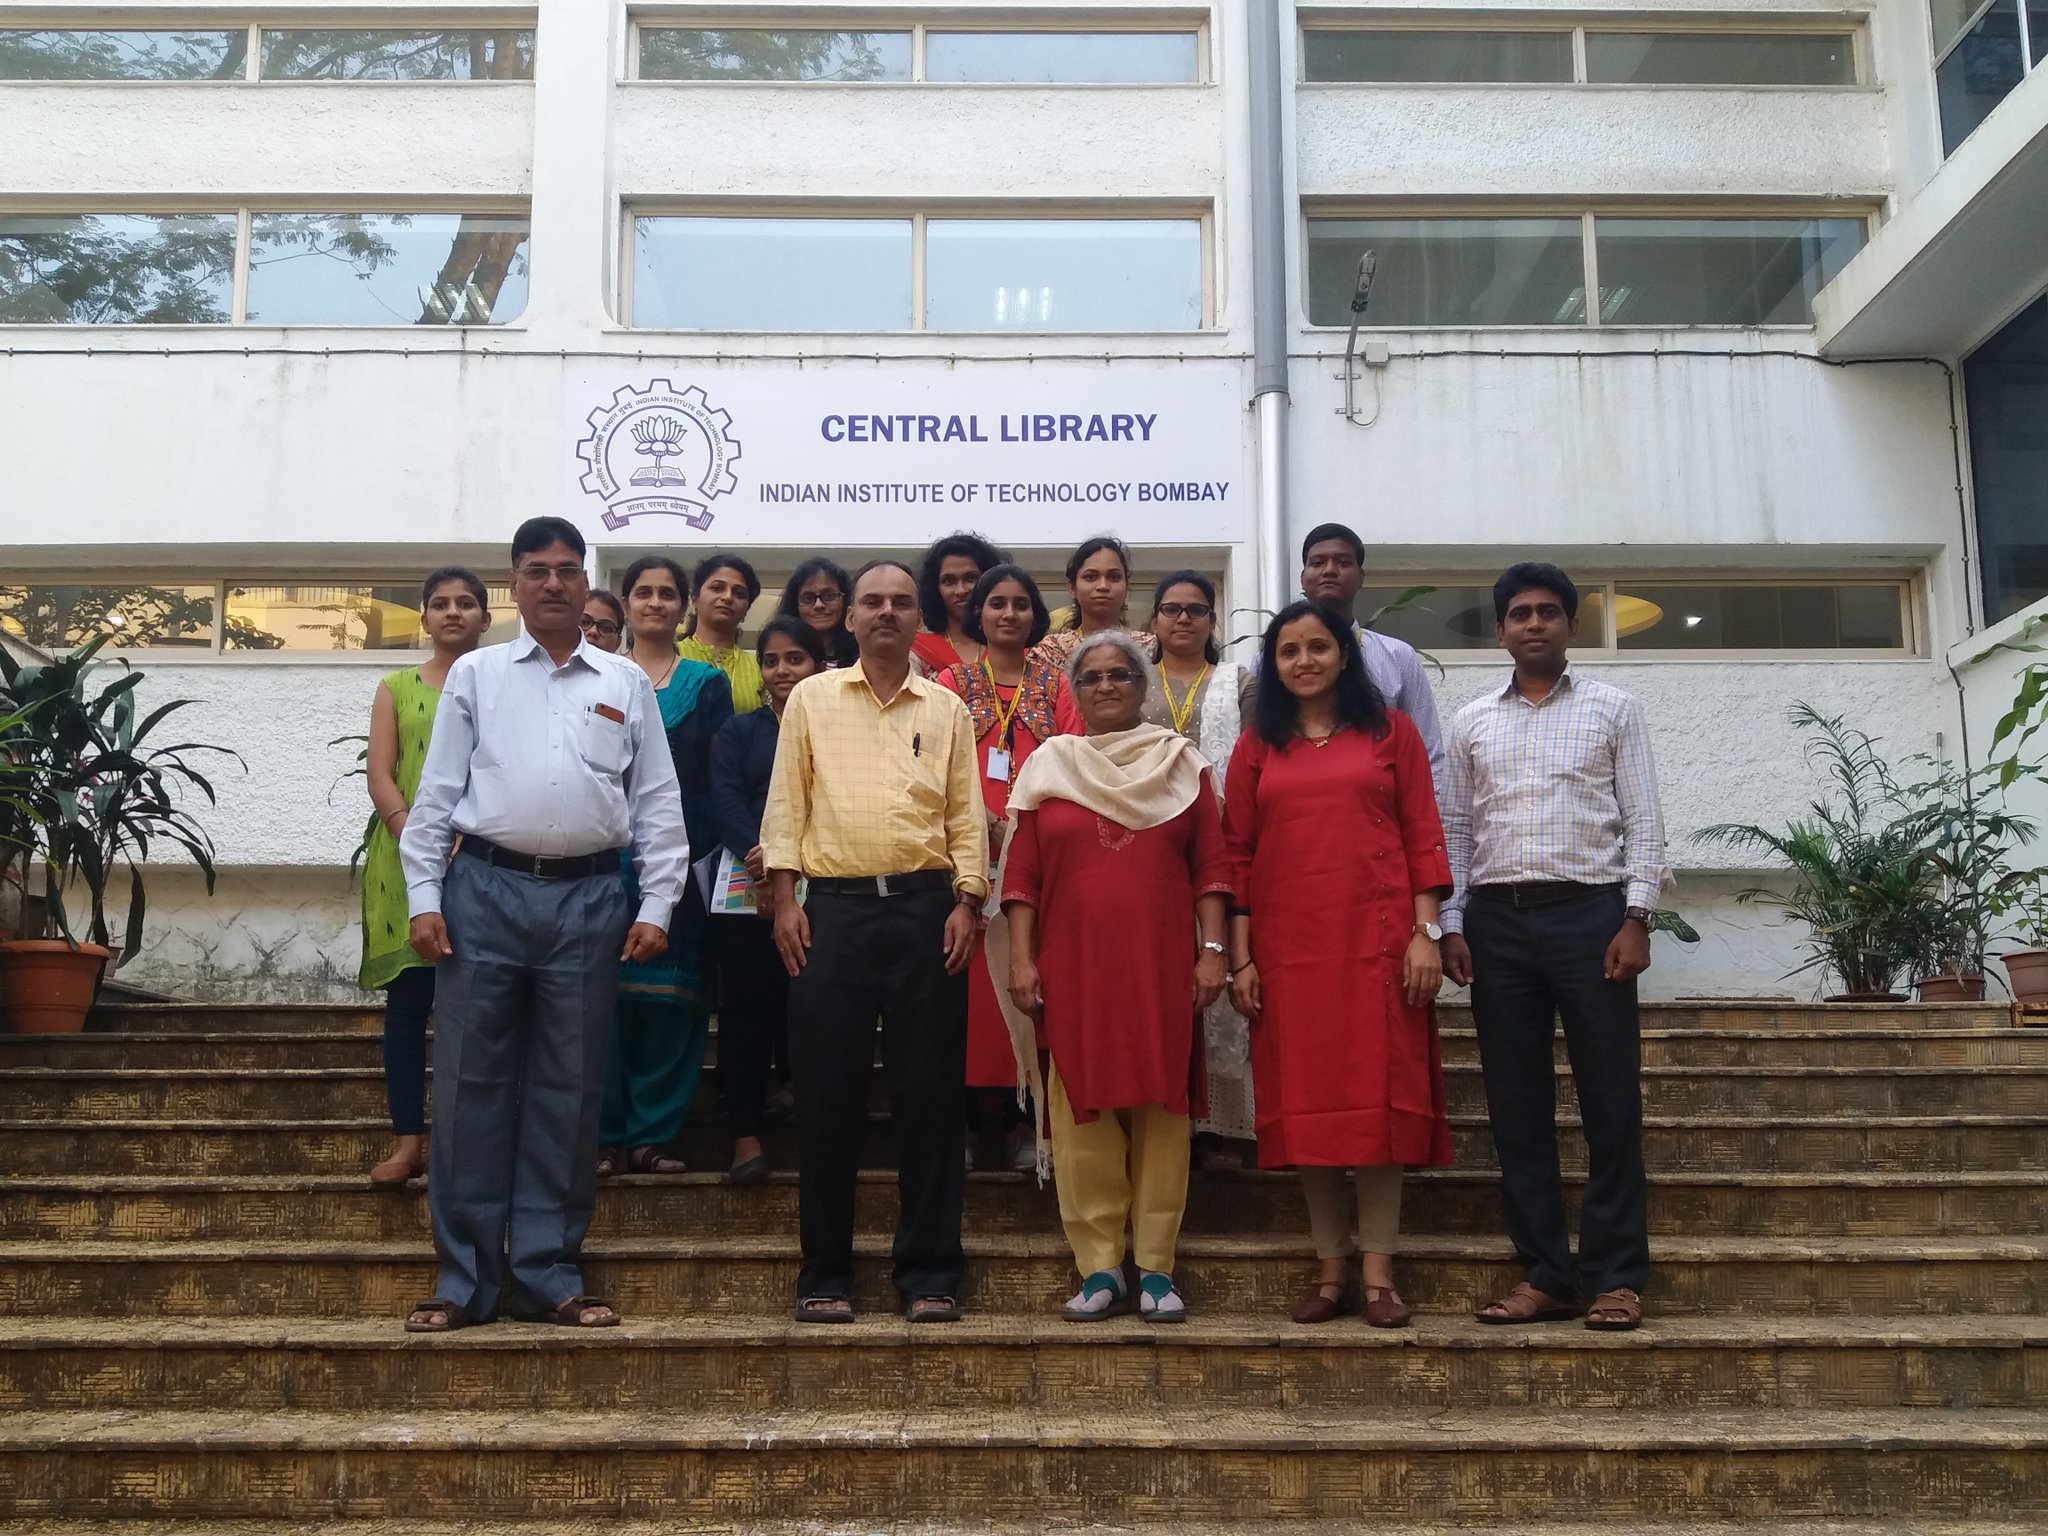 Iitb Central Library On Twitter Mlisc Students From Department